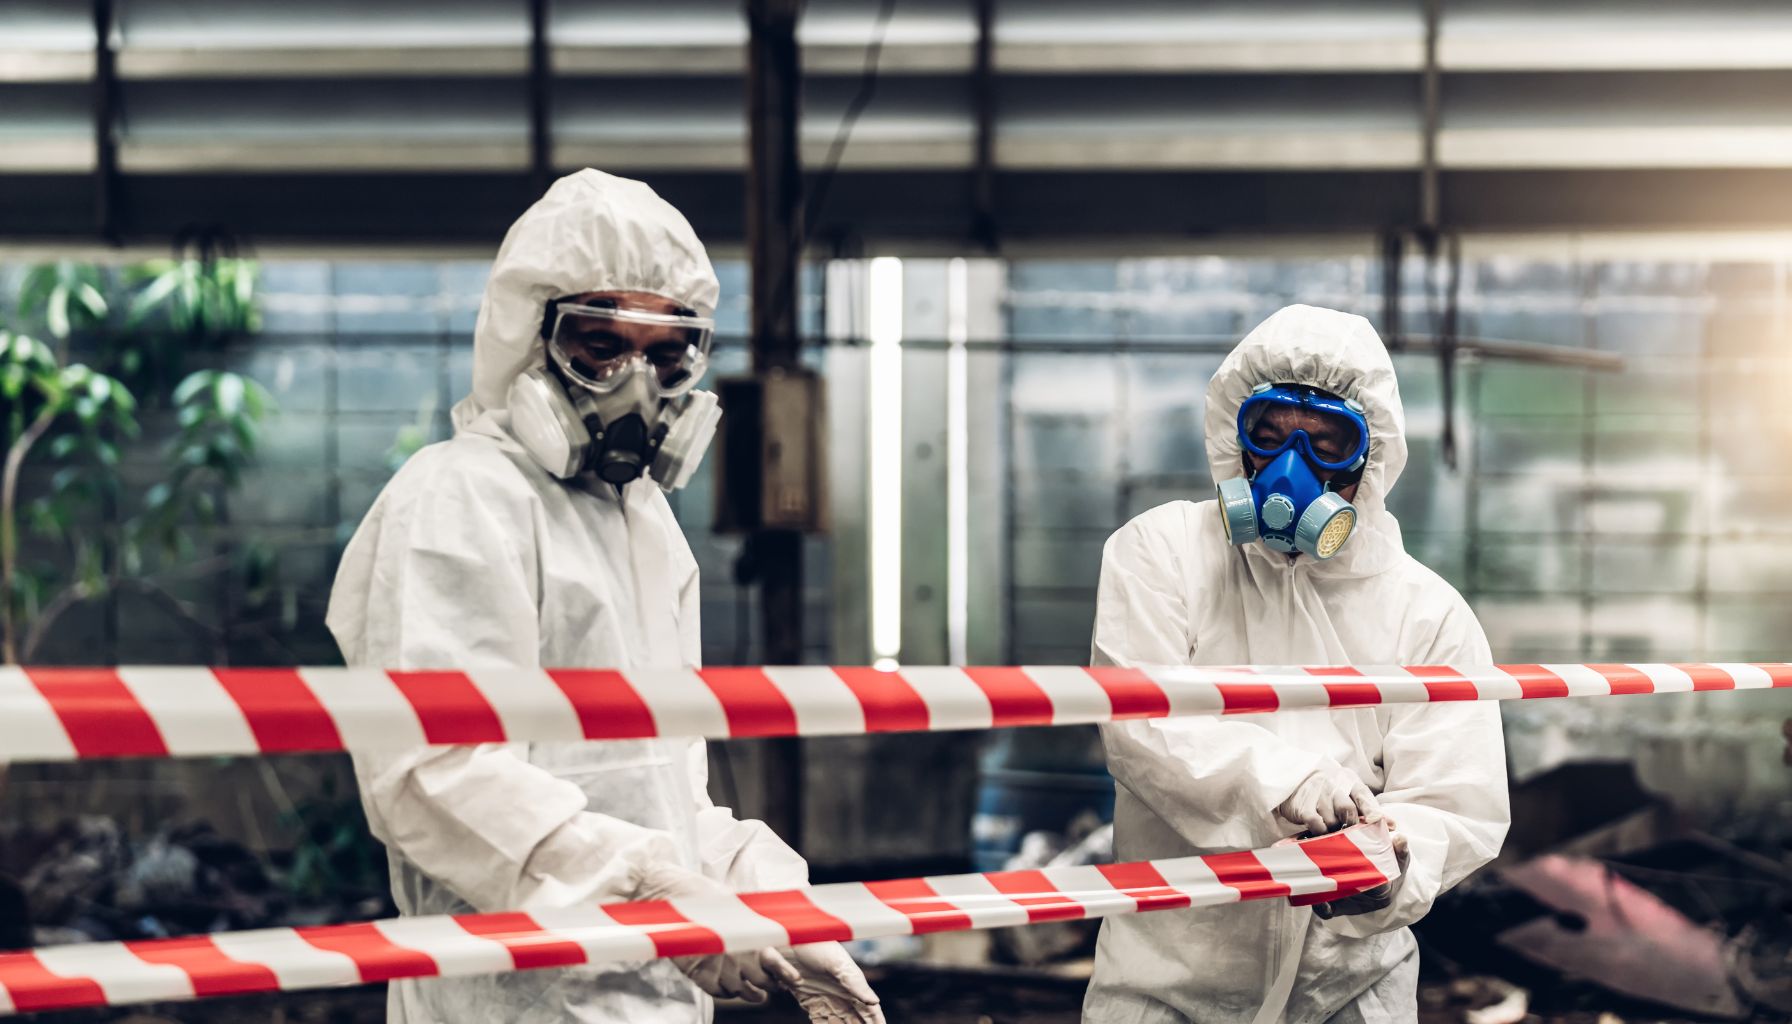 Two people in protective suits and gas masks handle red and white caution tape in an industrial setting, likely engaged in mold restoration efforts. -PureOneServices